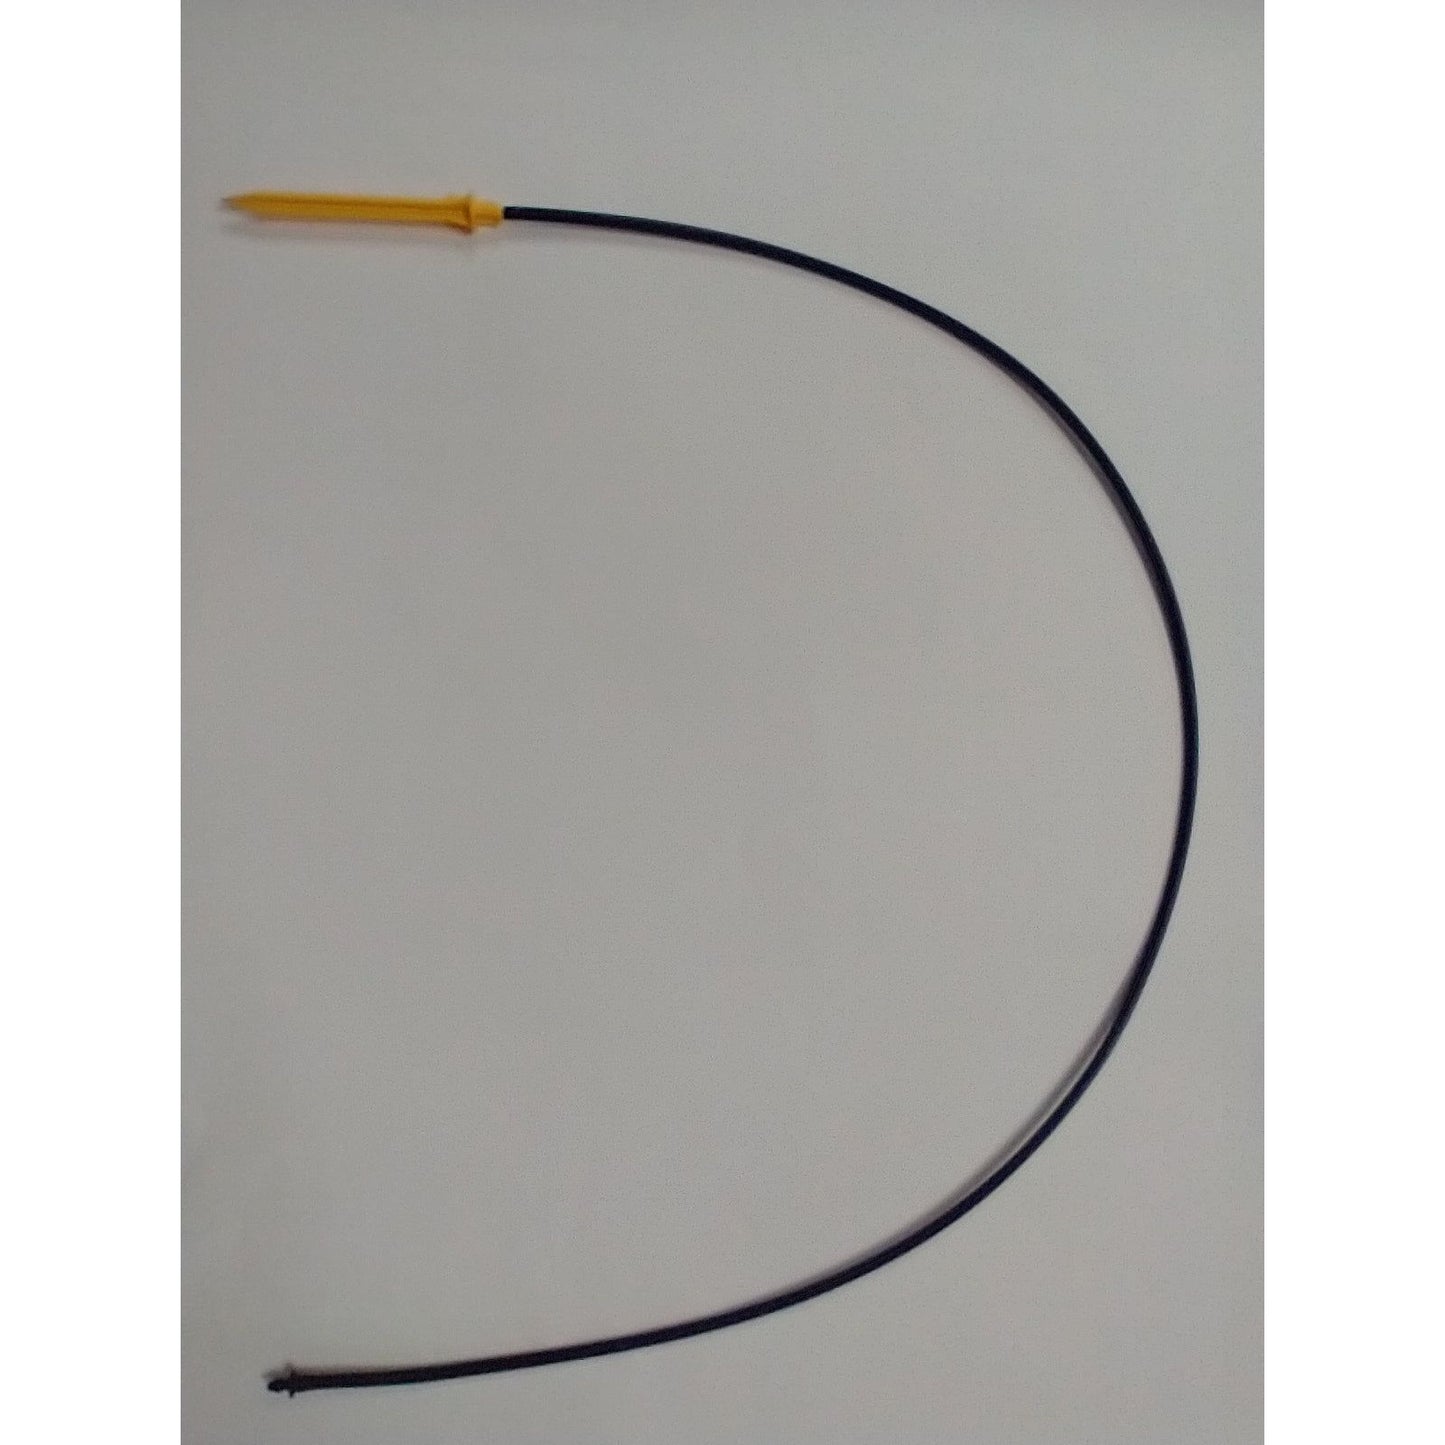 a black and yellow wire with a yellow tip